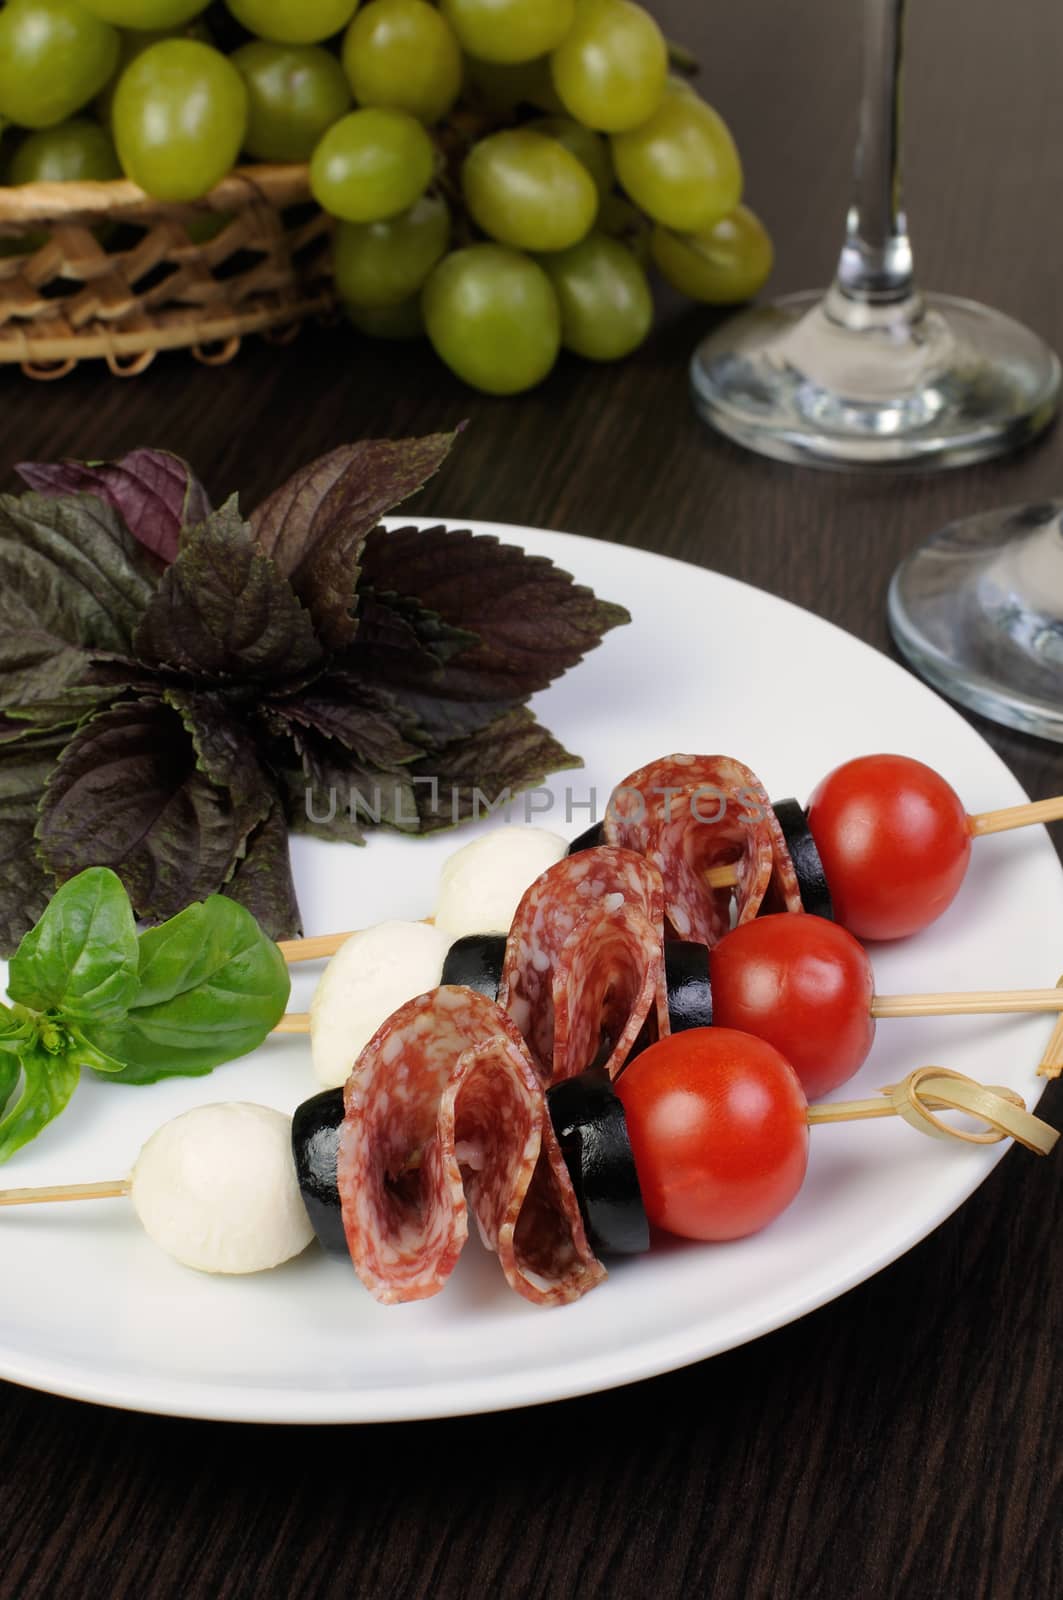 Appetizer of Salami by Apolonia